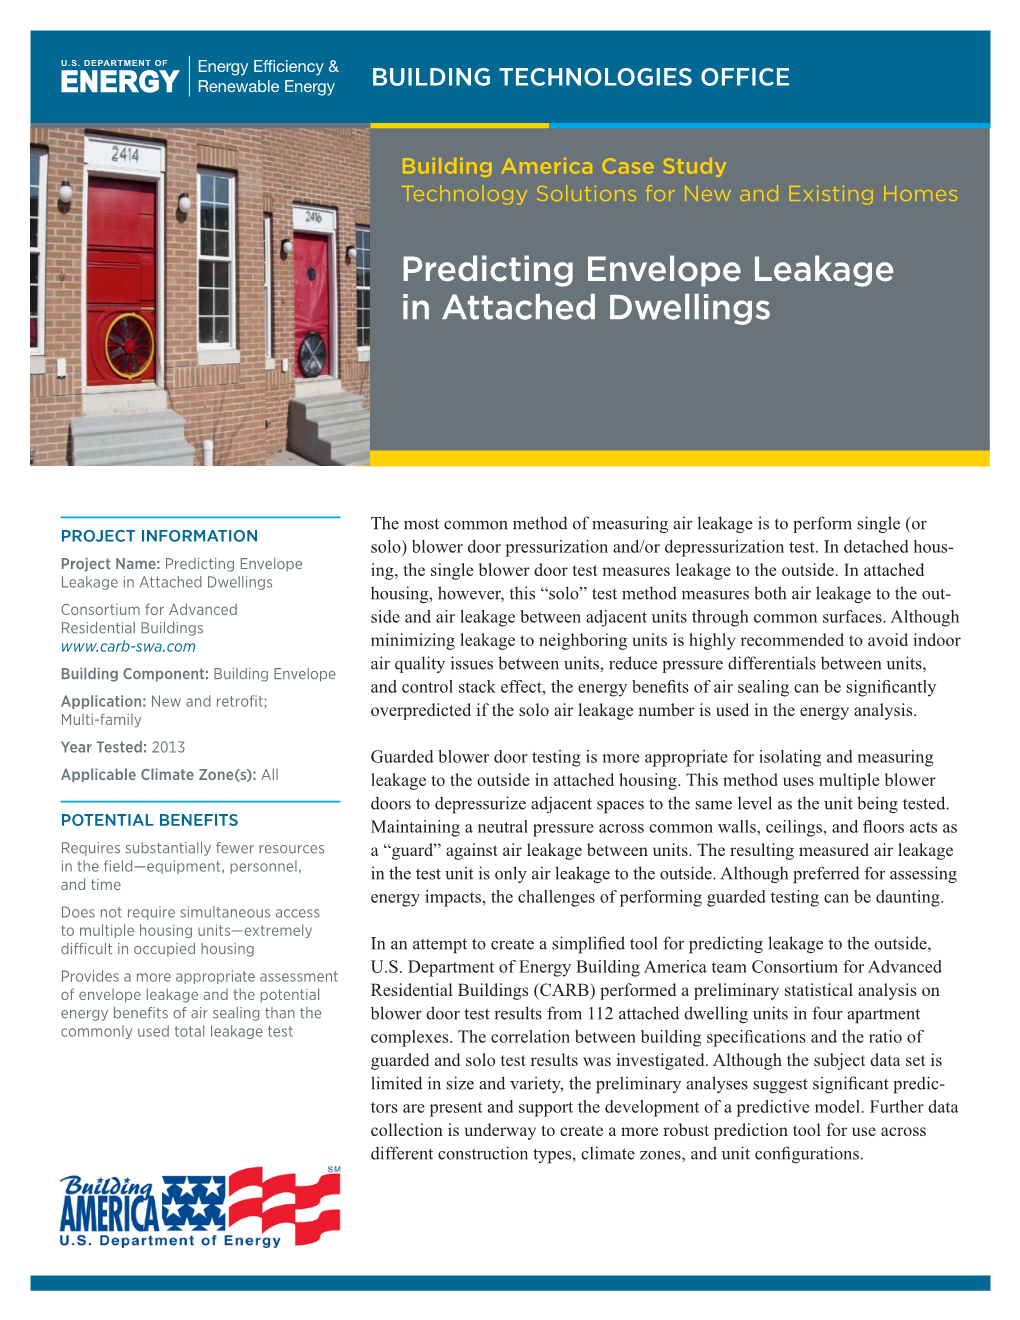 Predicting Envelope Leakage in Attached Dwellings